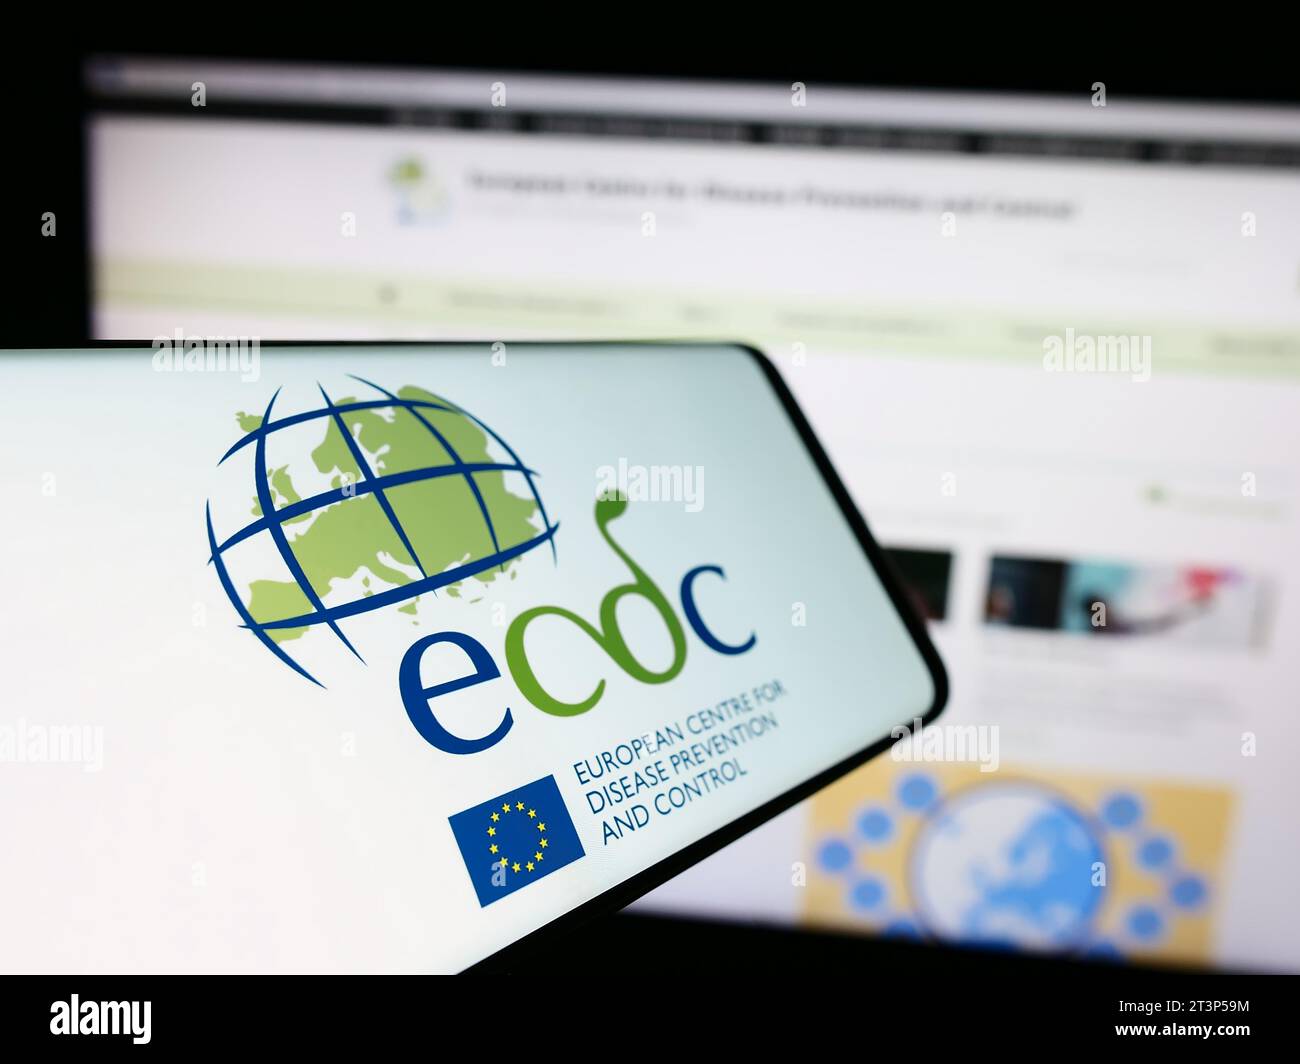 Mobile phone with logo of European Centre for Disease Prevention and Control (ECDC) in front of website. Focus on center-left of phone display. Stock Photo